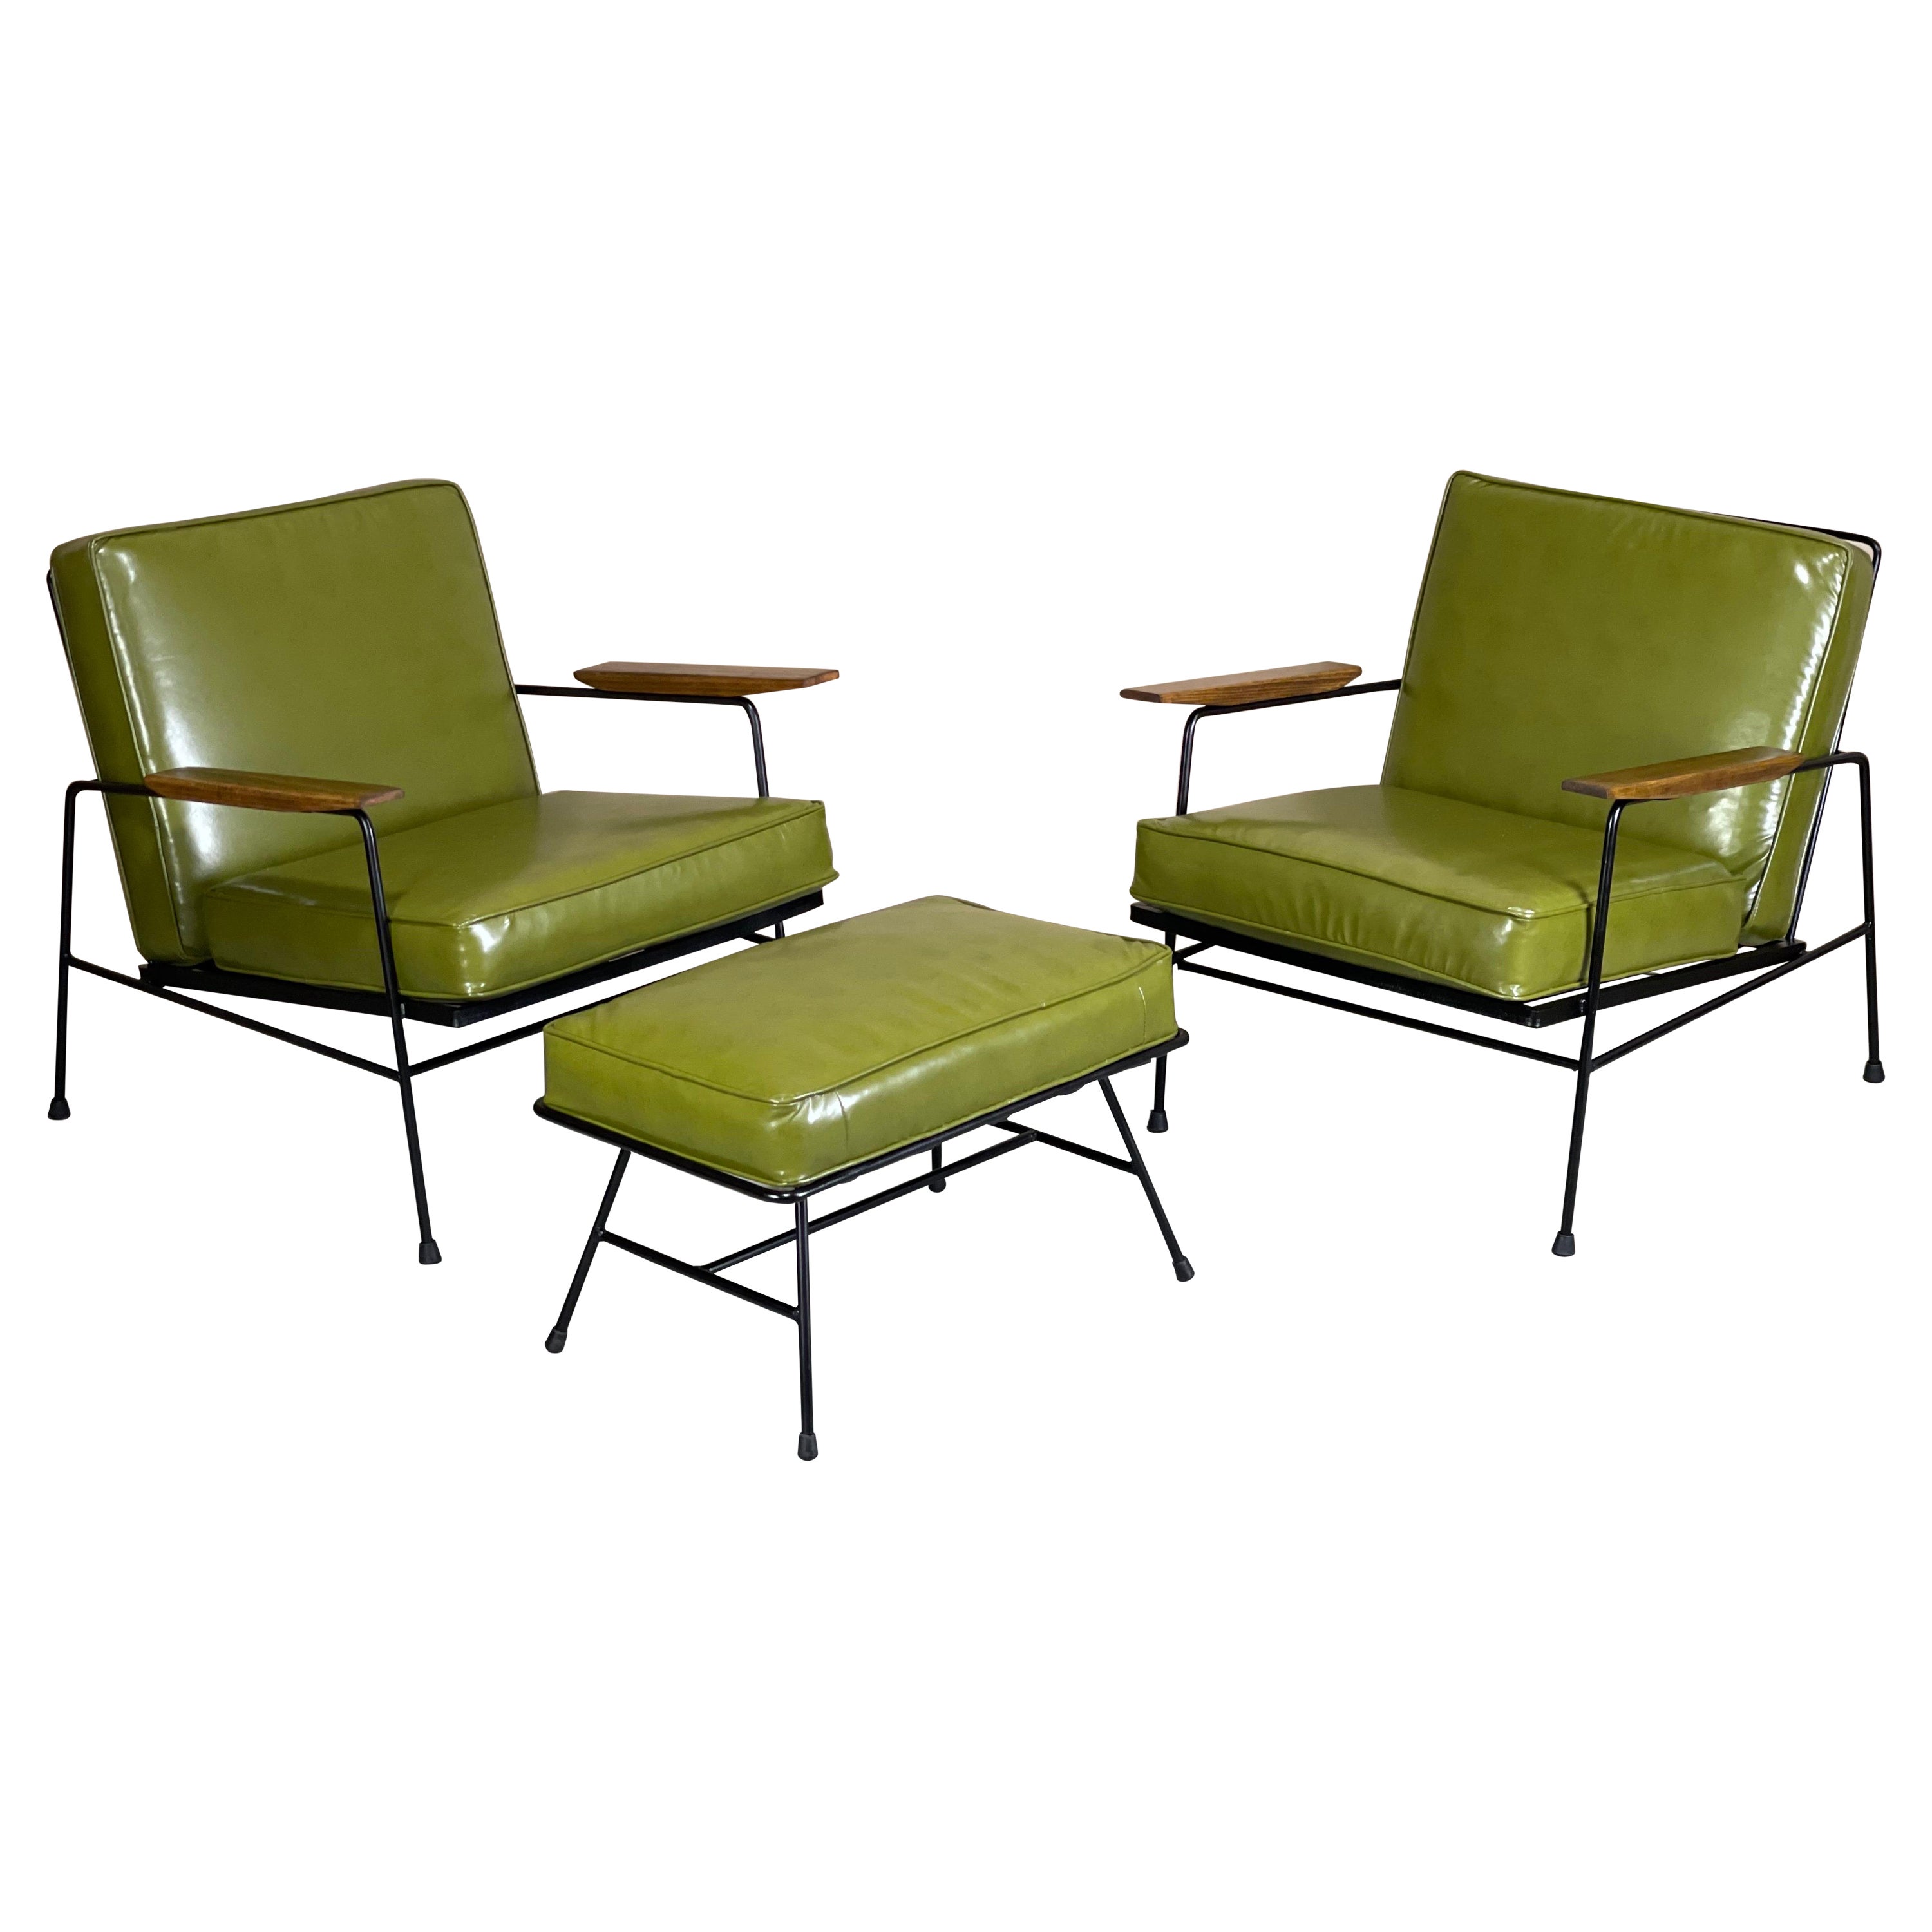 Mid-Century Lounge Chairs by Max Stout 1959 